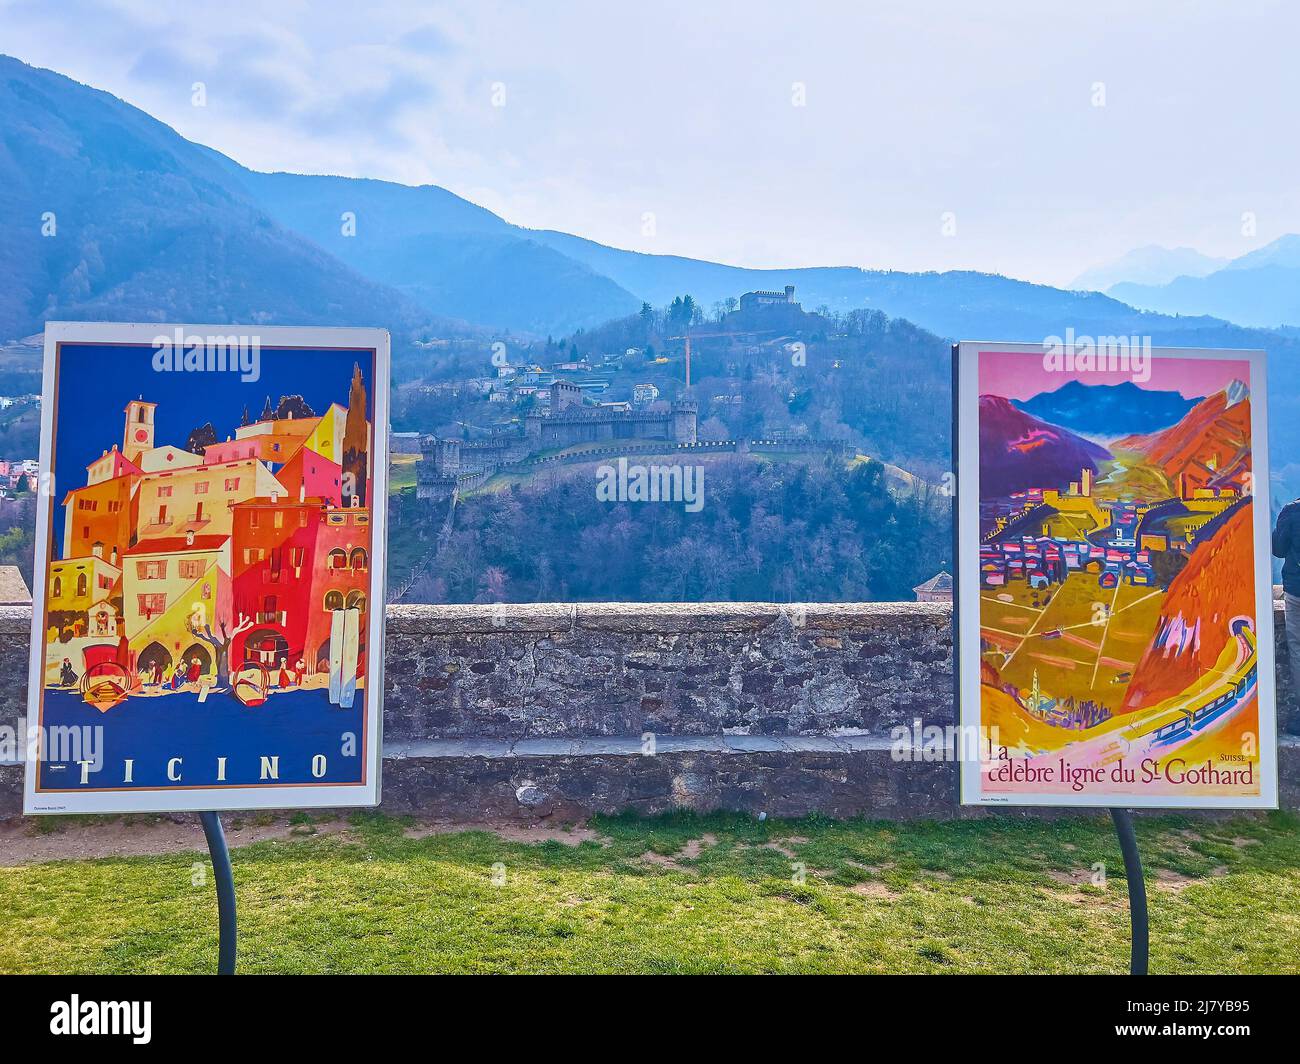 BELLINZONA, SWITZERLAND - MARCH 19, 2022: The vintage styled postcards in the courtayrd of Castelgrande, on March 19 in Bellinzona, Switzerland Stock Photo